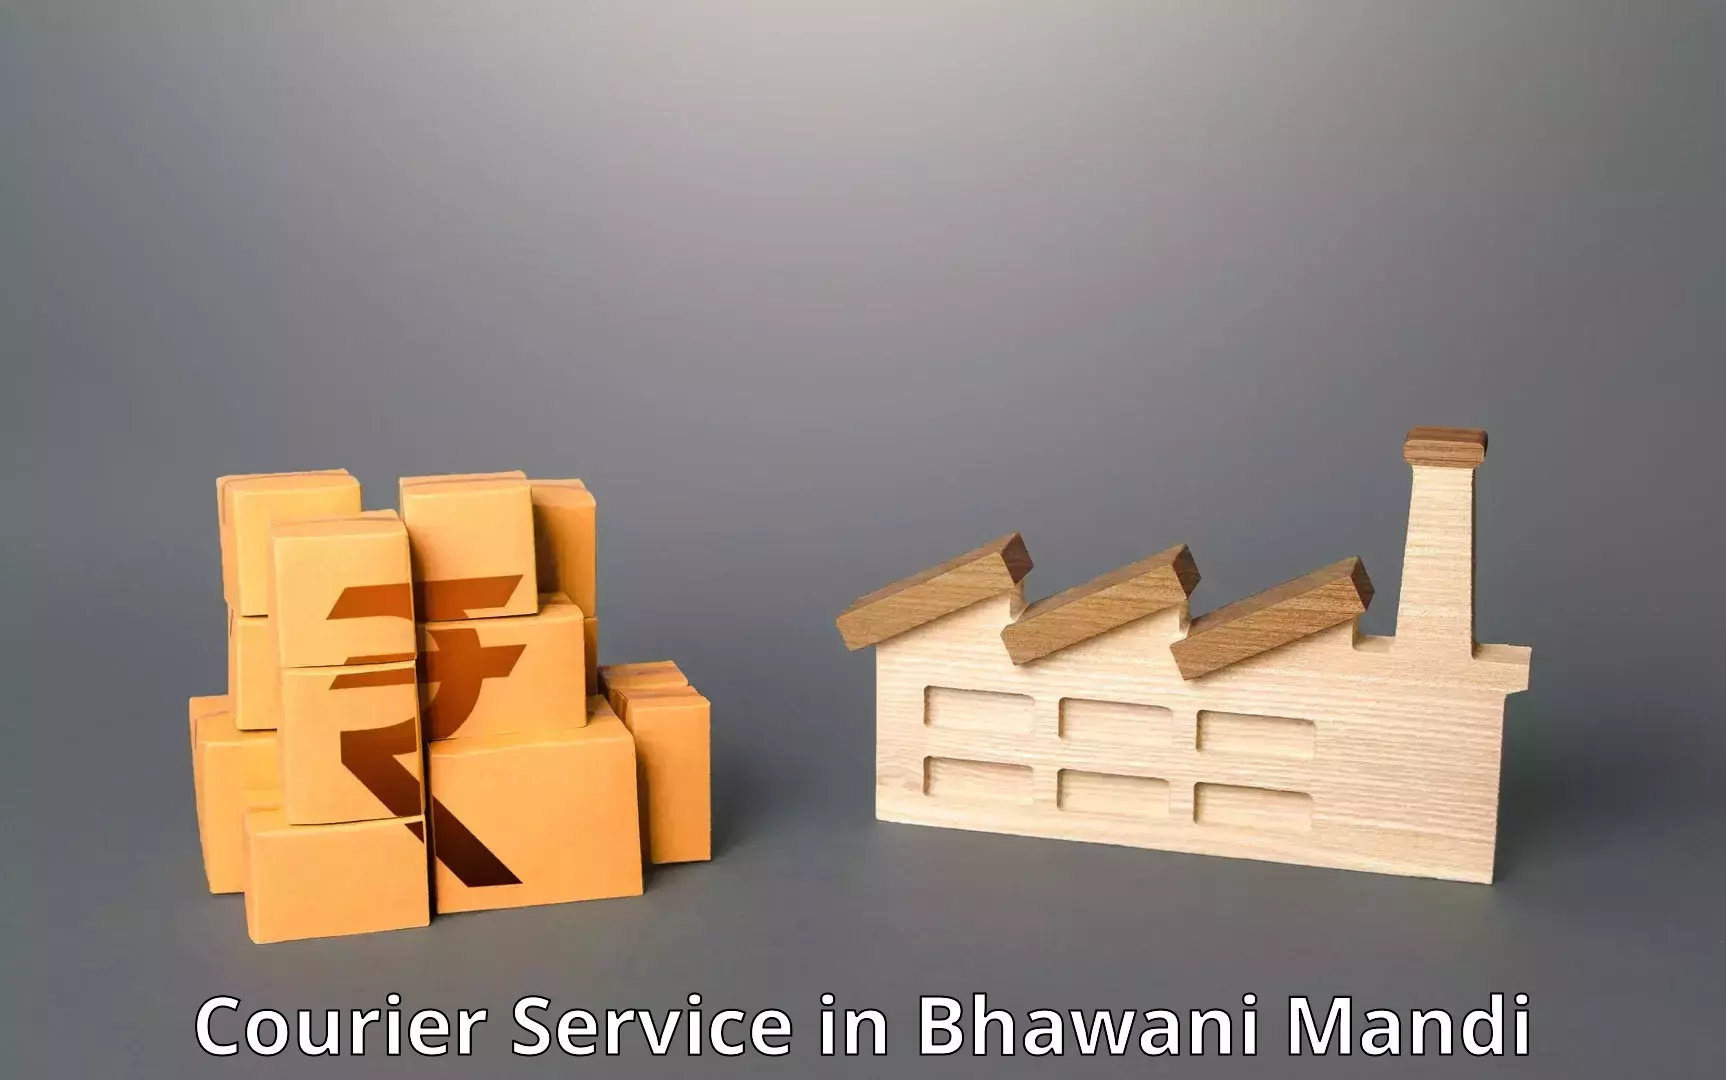 Courier service booking in Bhawani Mandi